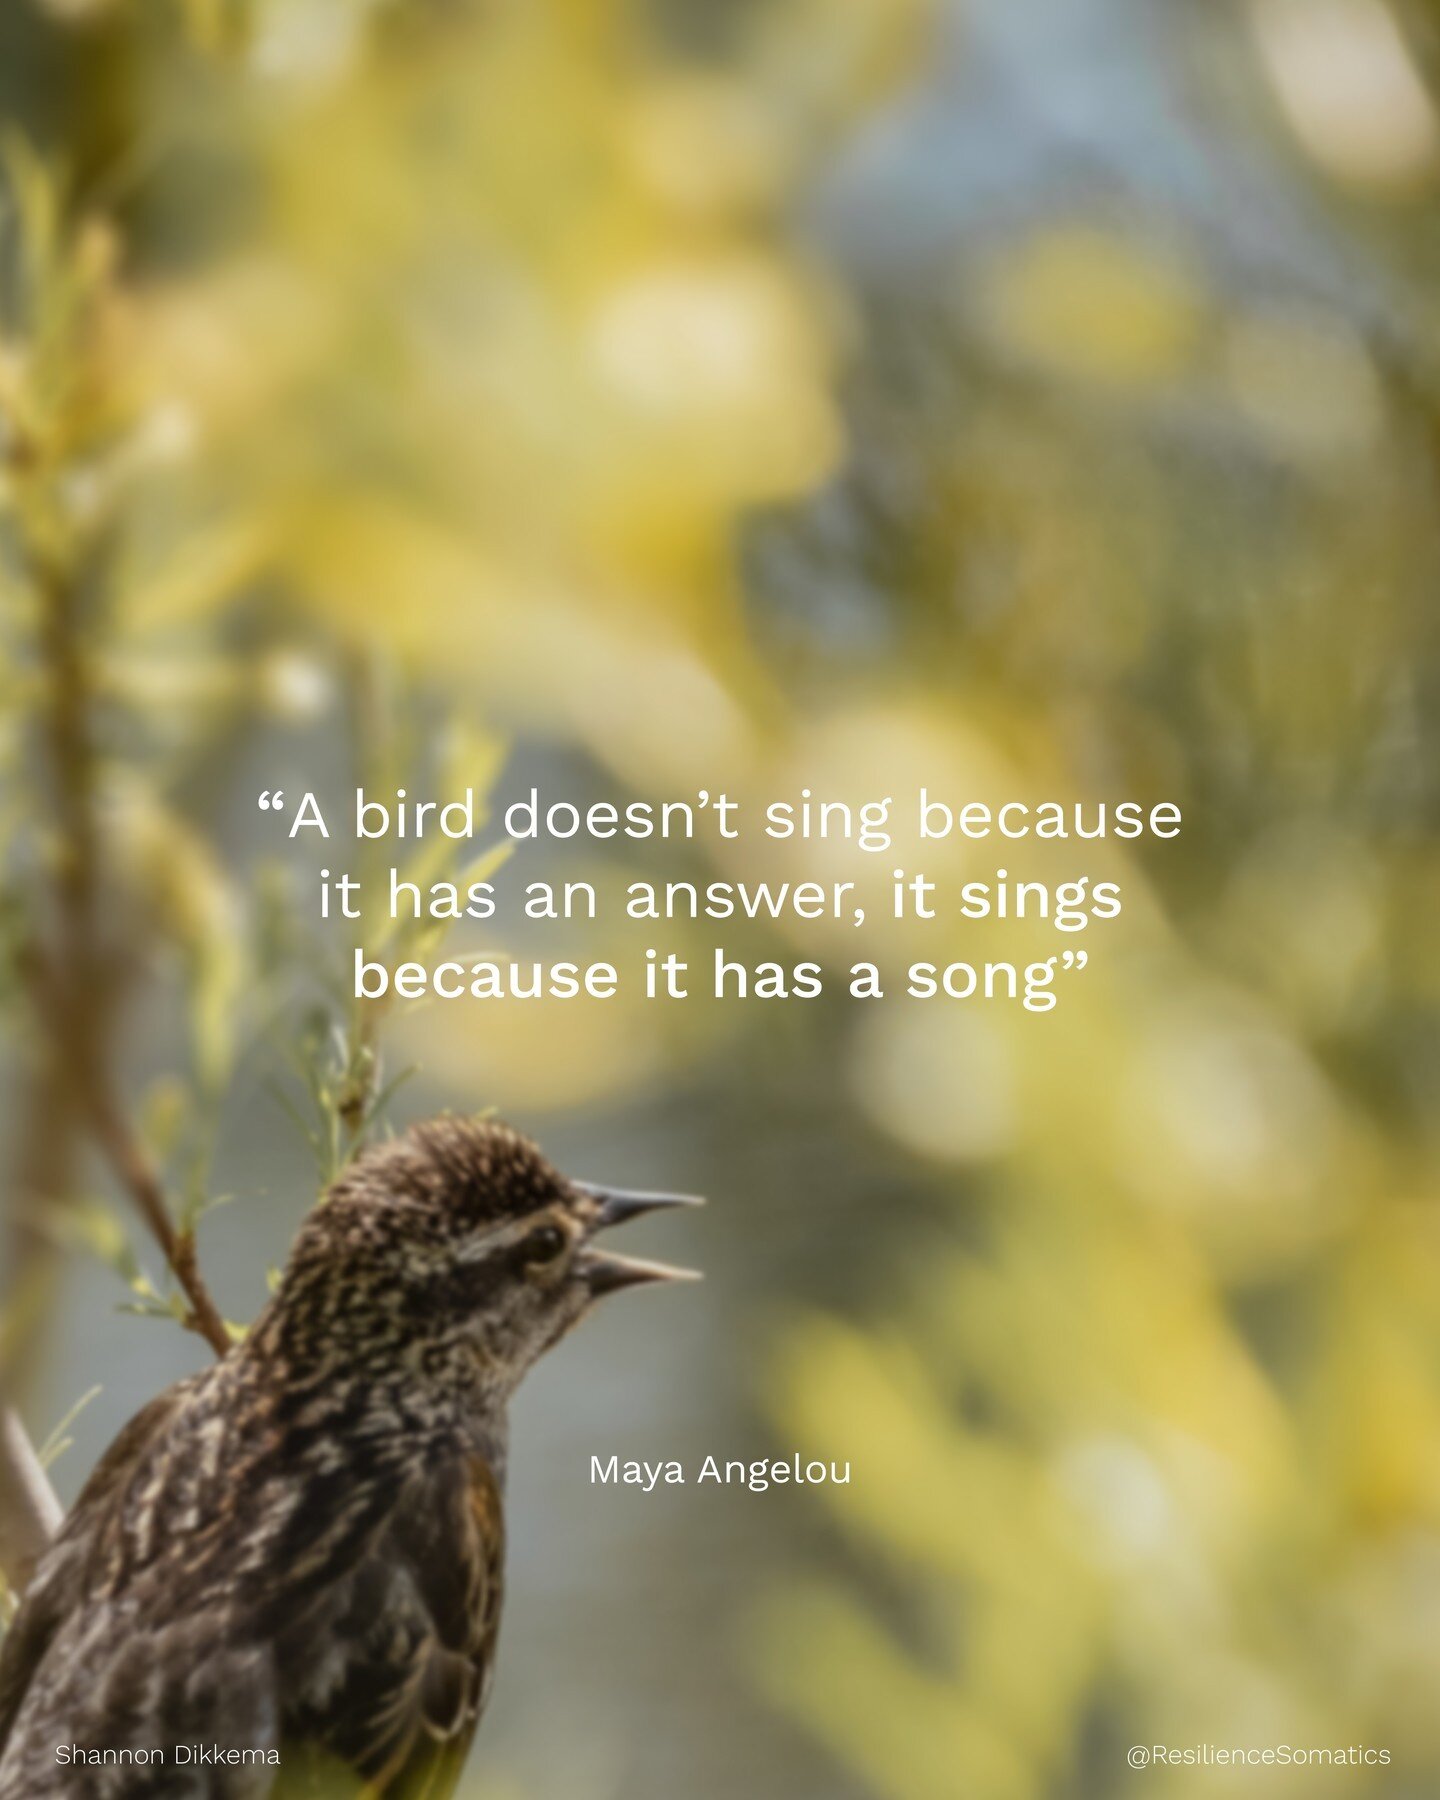 We don't always have all the answers, but we find healing and growth by finding compassion. Just like a bird sings its song, let your inner voice be heard. ⁠
⁠
Check out the link in bio to learn about building a relationship with your nervous system 